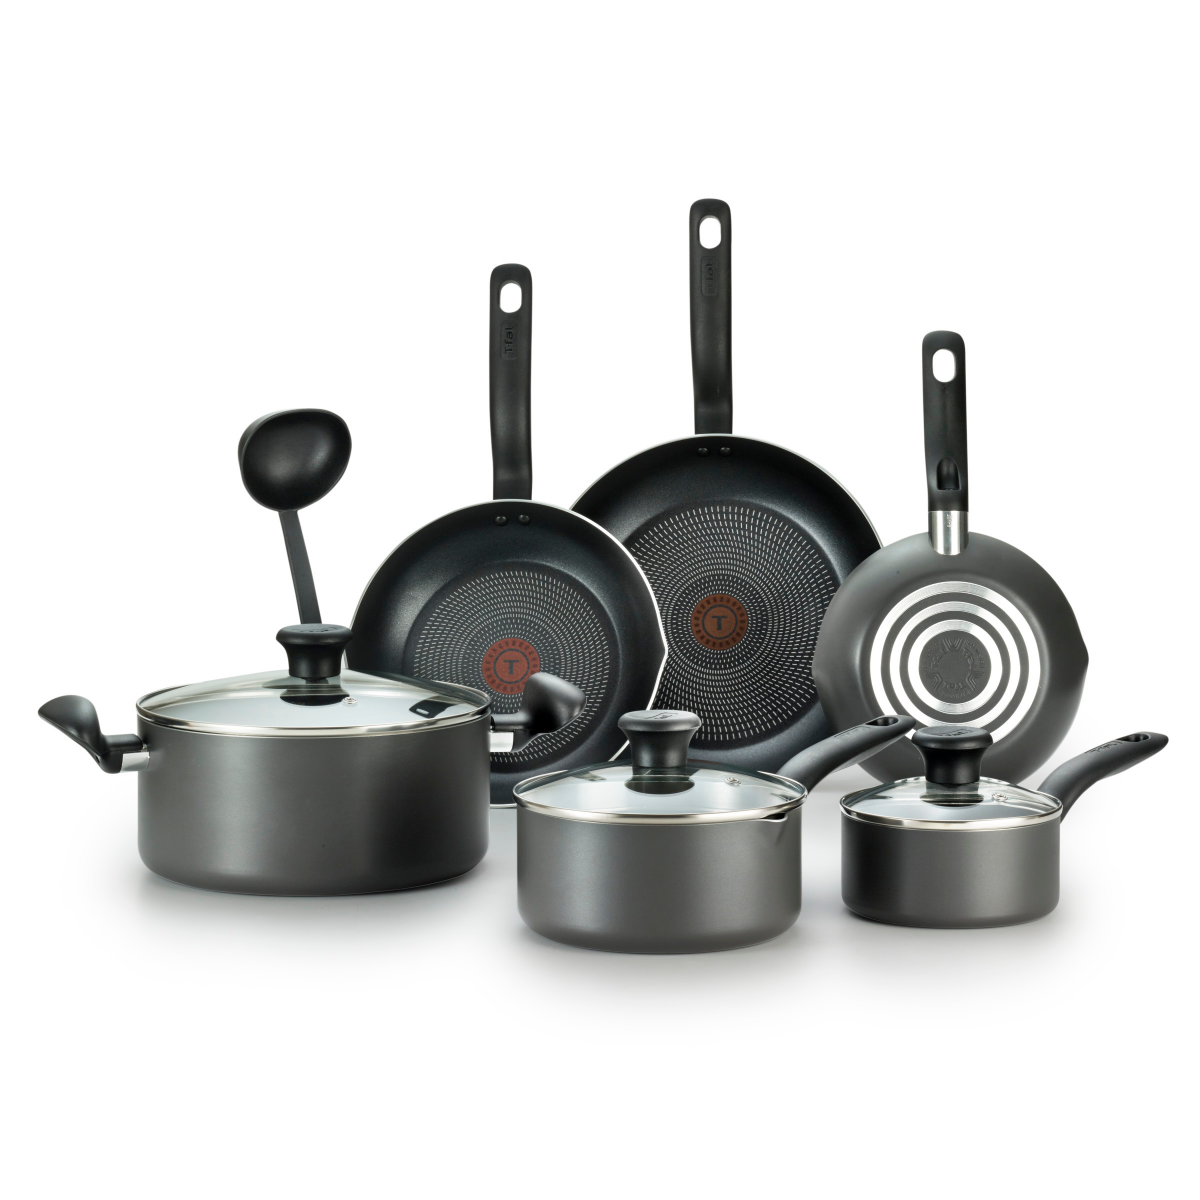 slide 13 of 29, T-fal Initiatives Nonstick Inside and Out Cookware Set - Charcoal, 10 pc